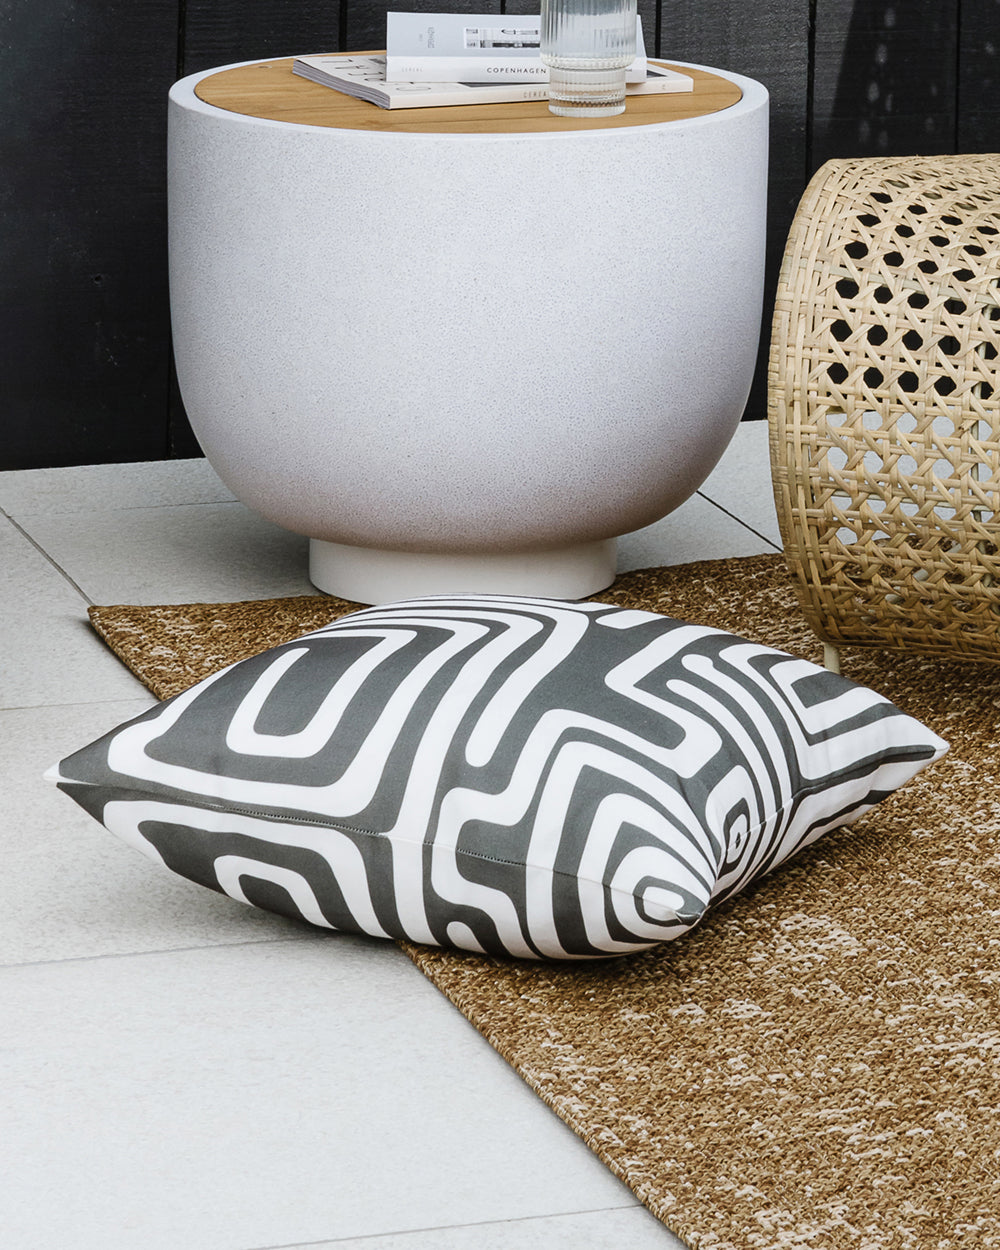 Pico outdoor cushion with deep olive tribal lines on white background placed on a brown outdoor rug with a concrete outdoor side table